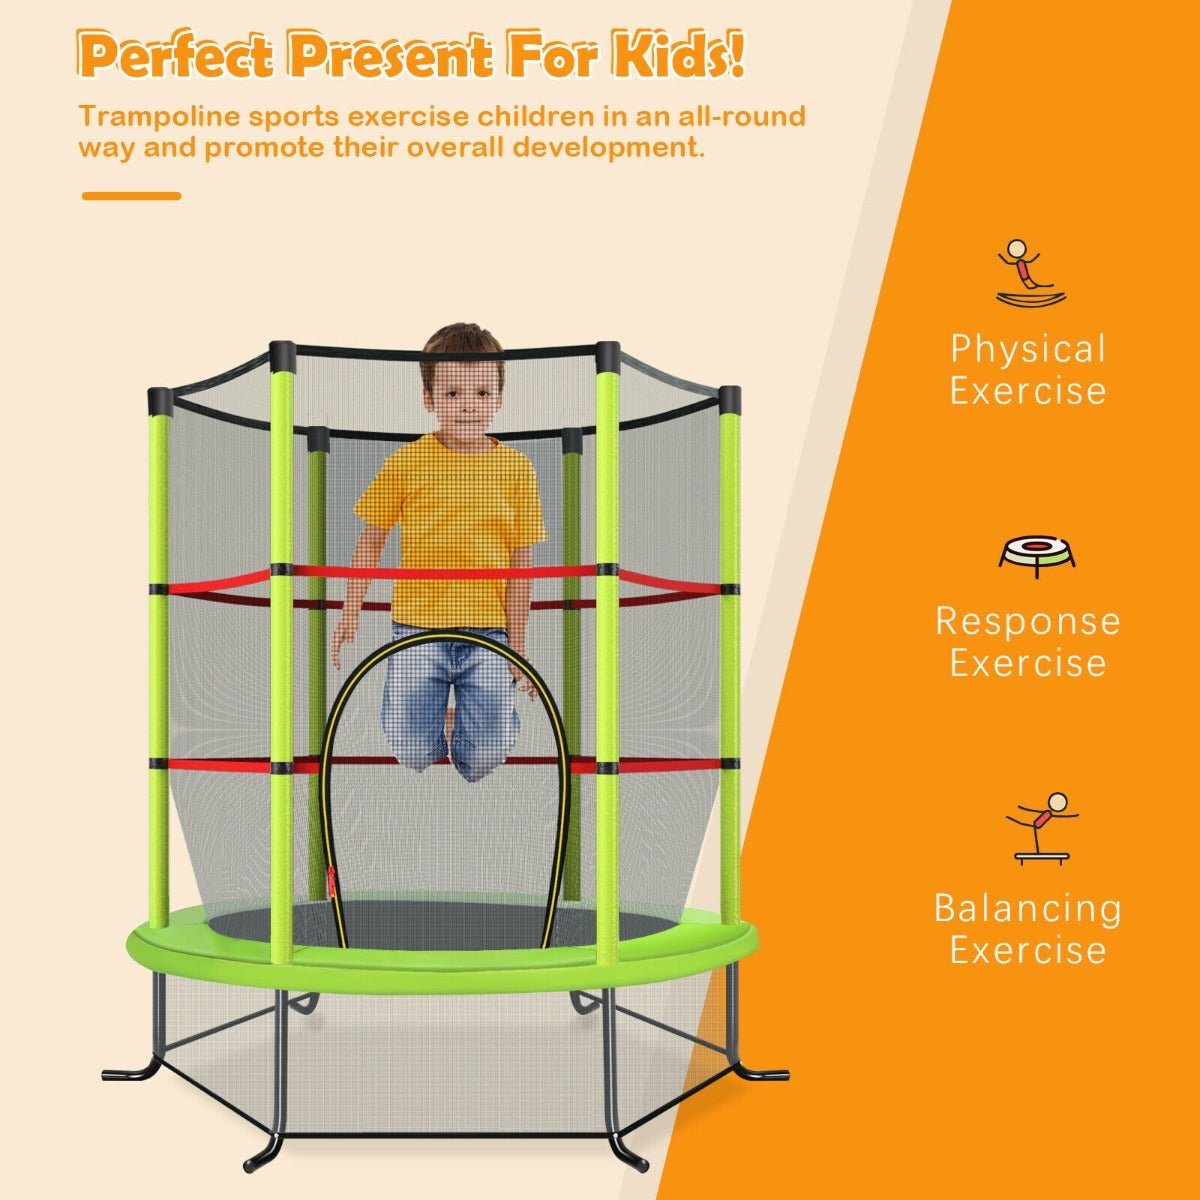 Energetic Playtime: Green Mini Trampoline with Safety Enclosure